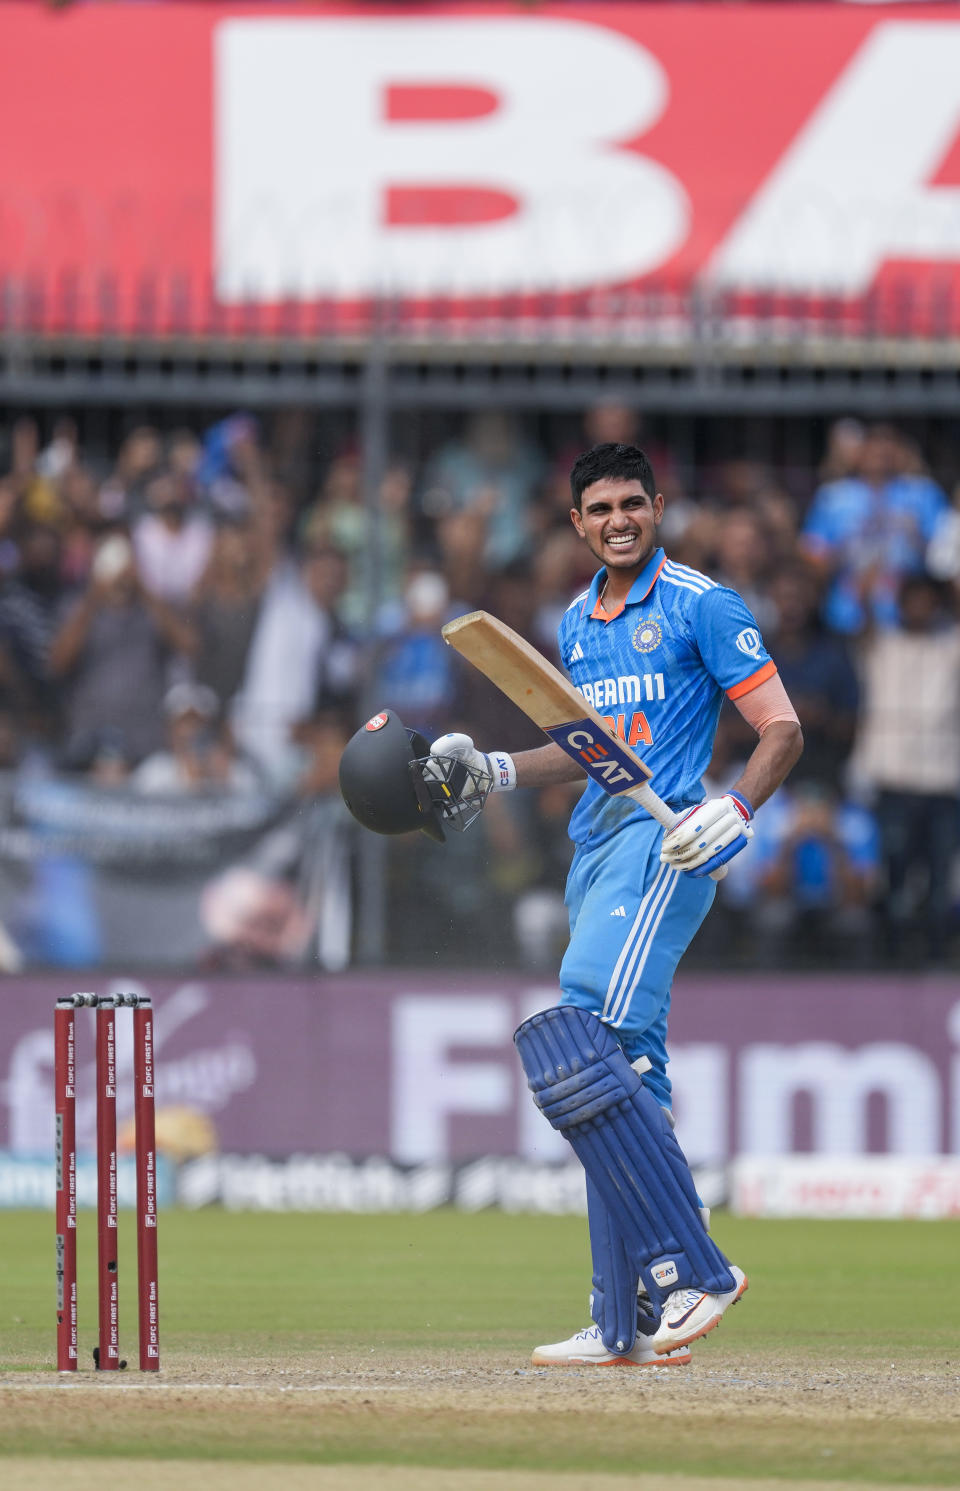 India's Shubman Gill celebrates his century during the second one day international cricket match between India and Australia in Indore, India, Sunday, Sept. 24, 2023. (AP Photo/Ajit Solanki)